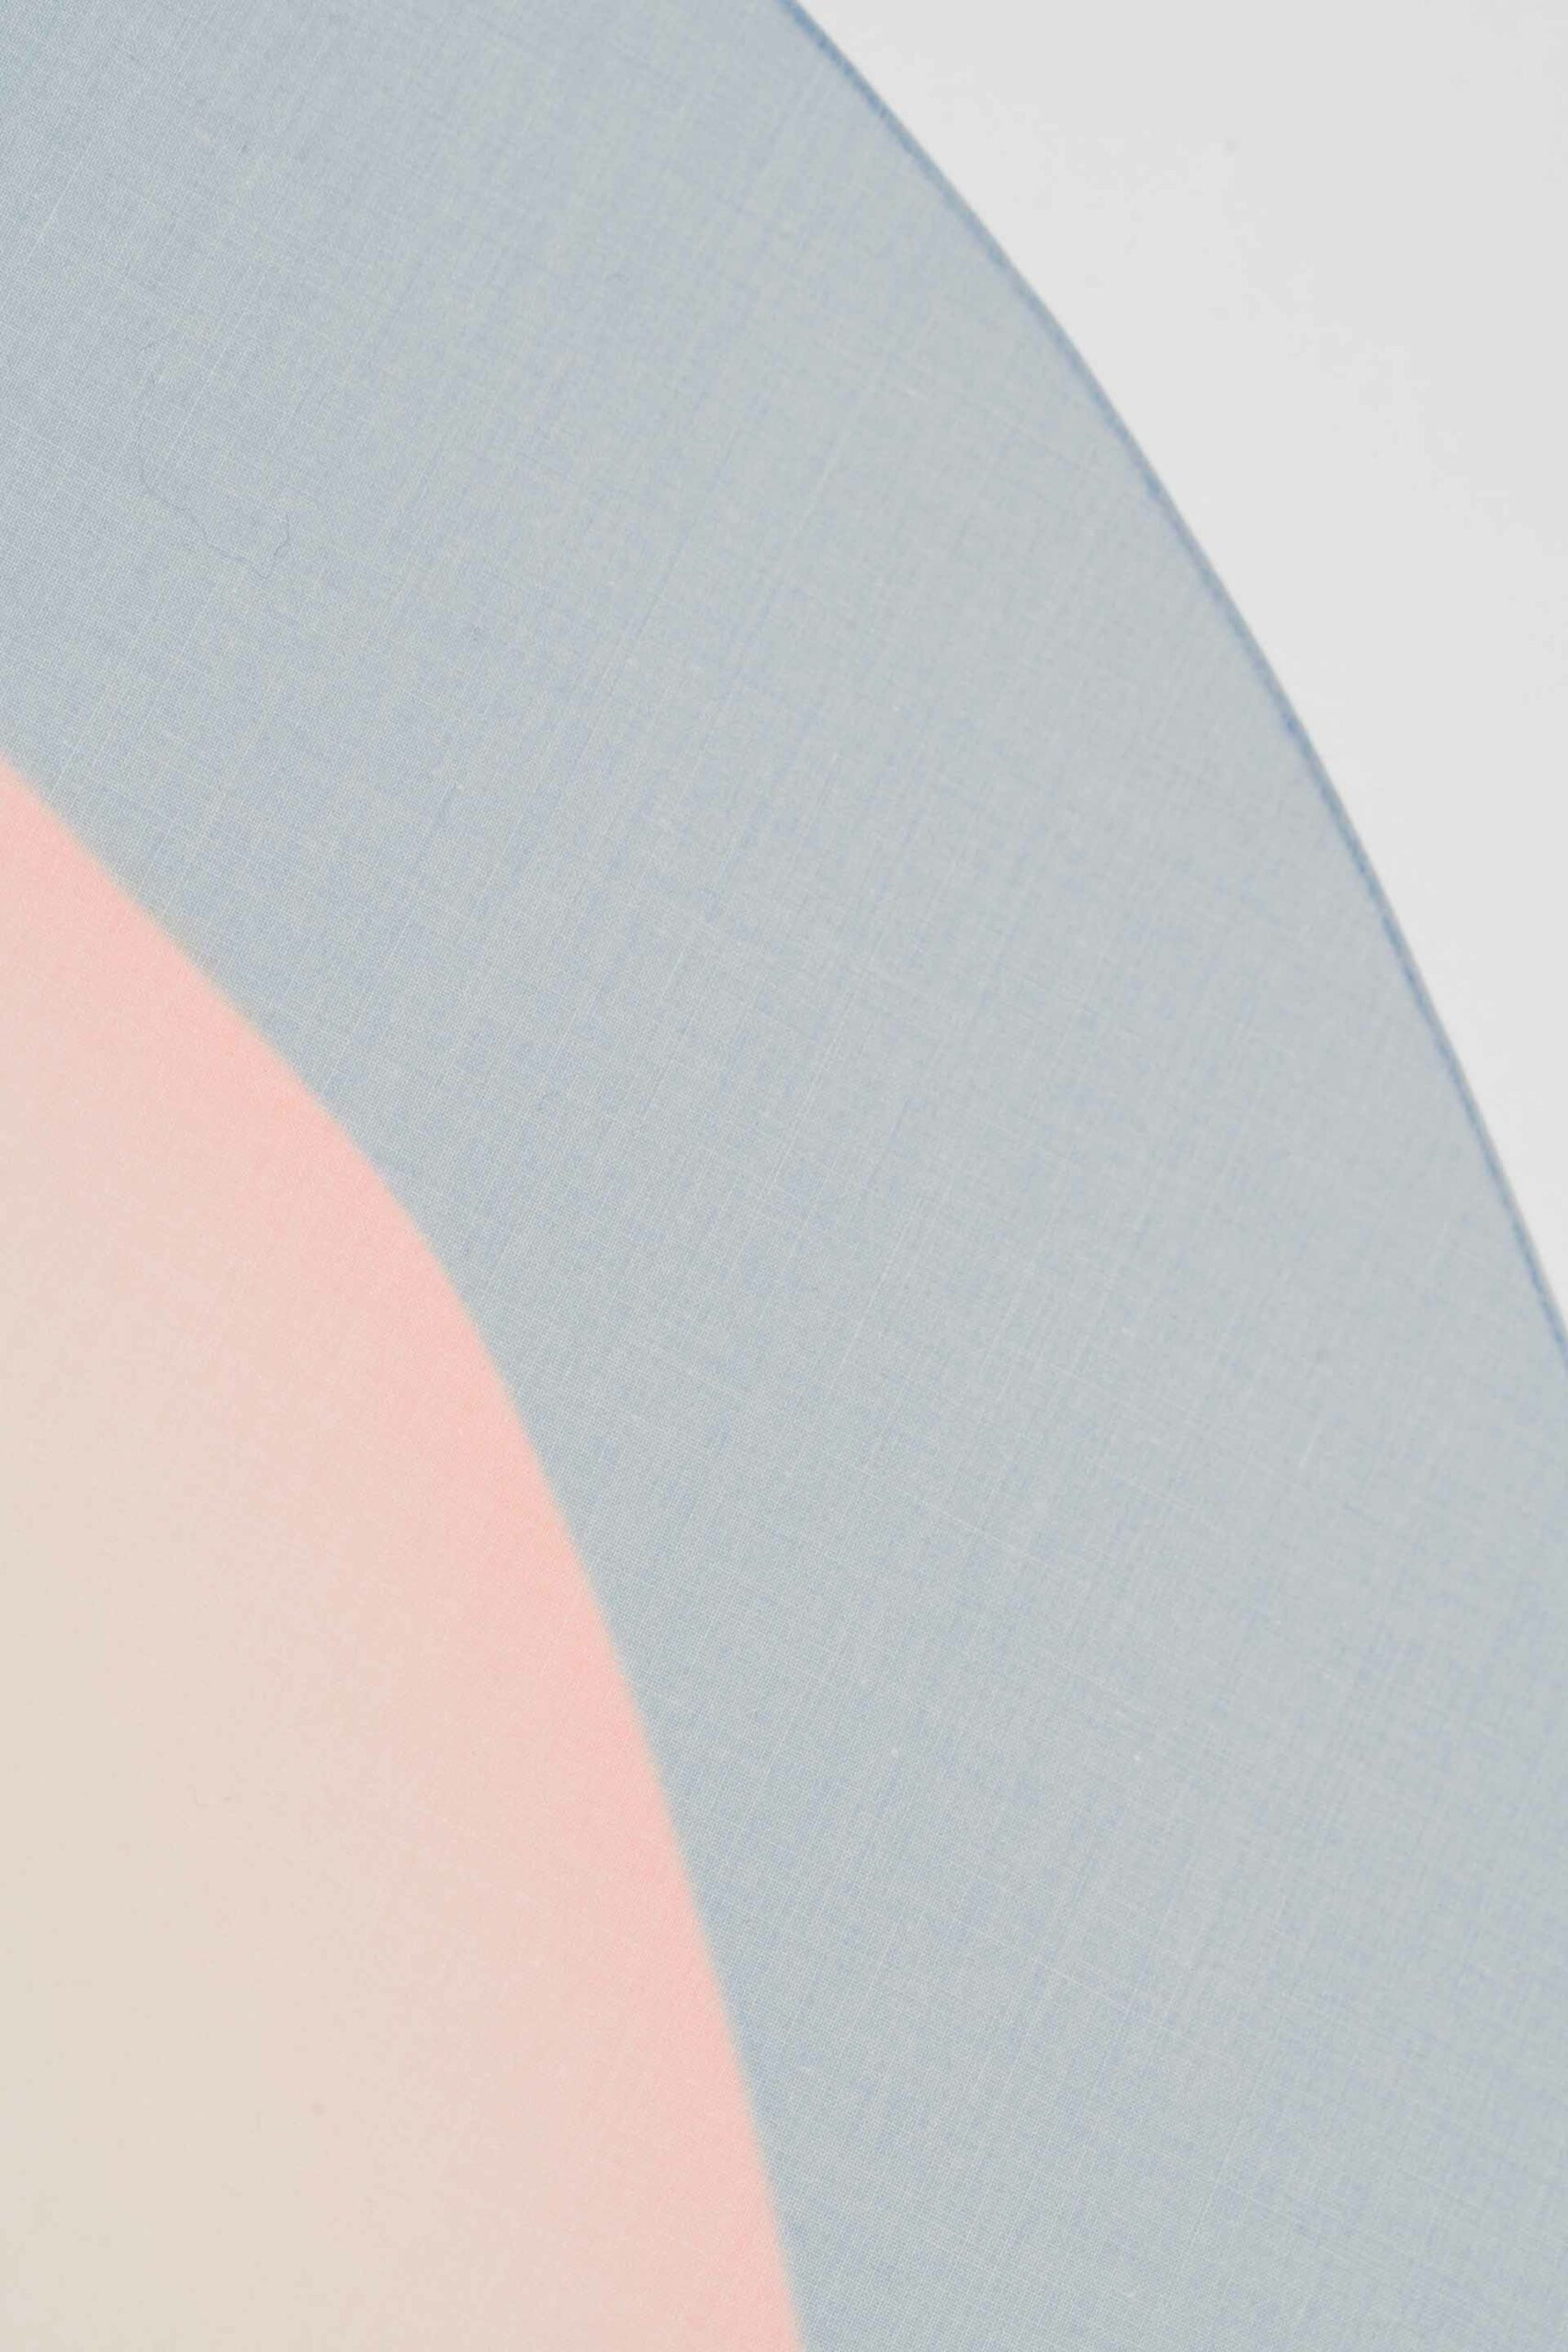 Pale blue circular image ringing a pale pink circle like shape against a white background